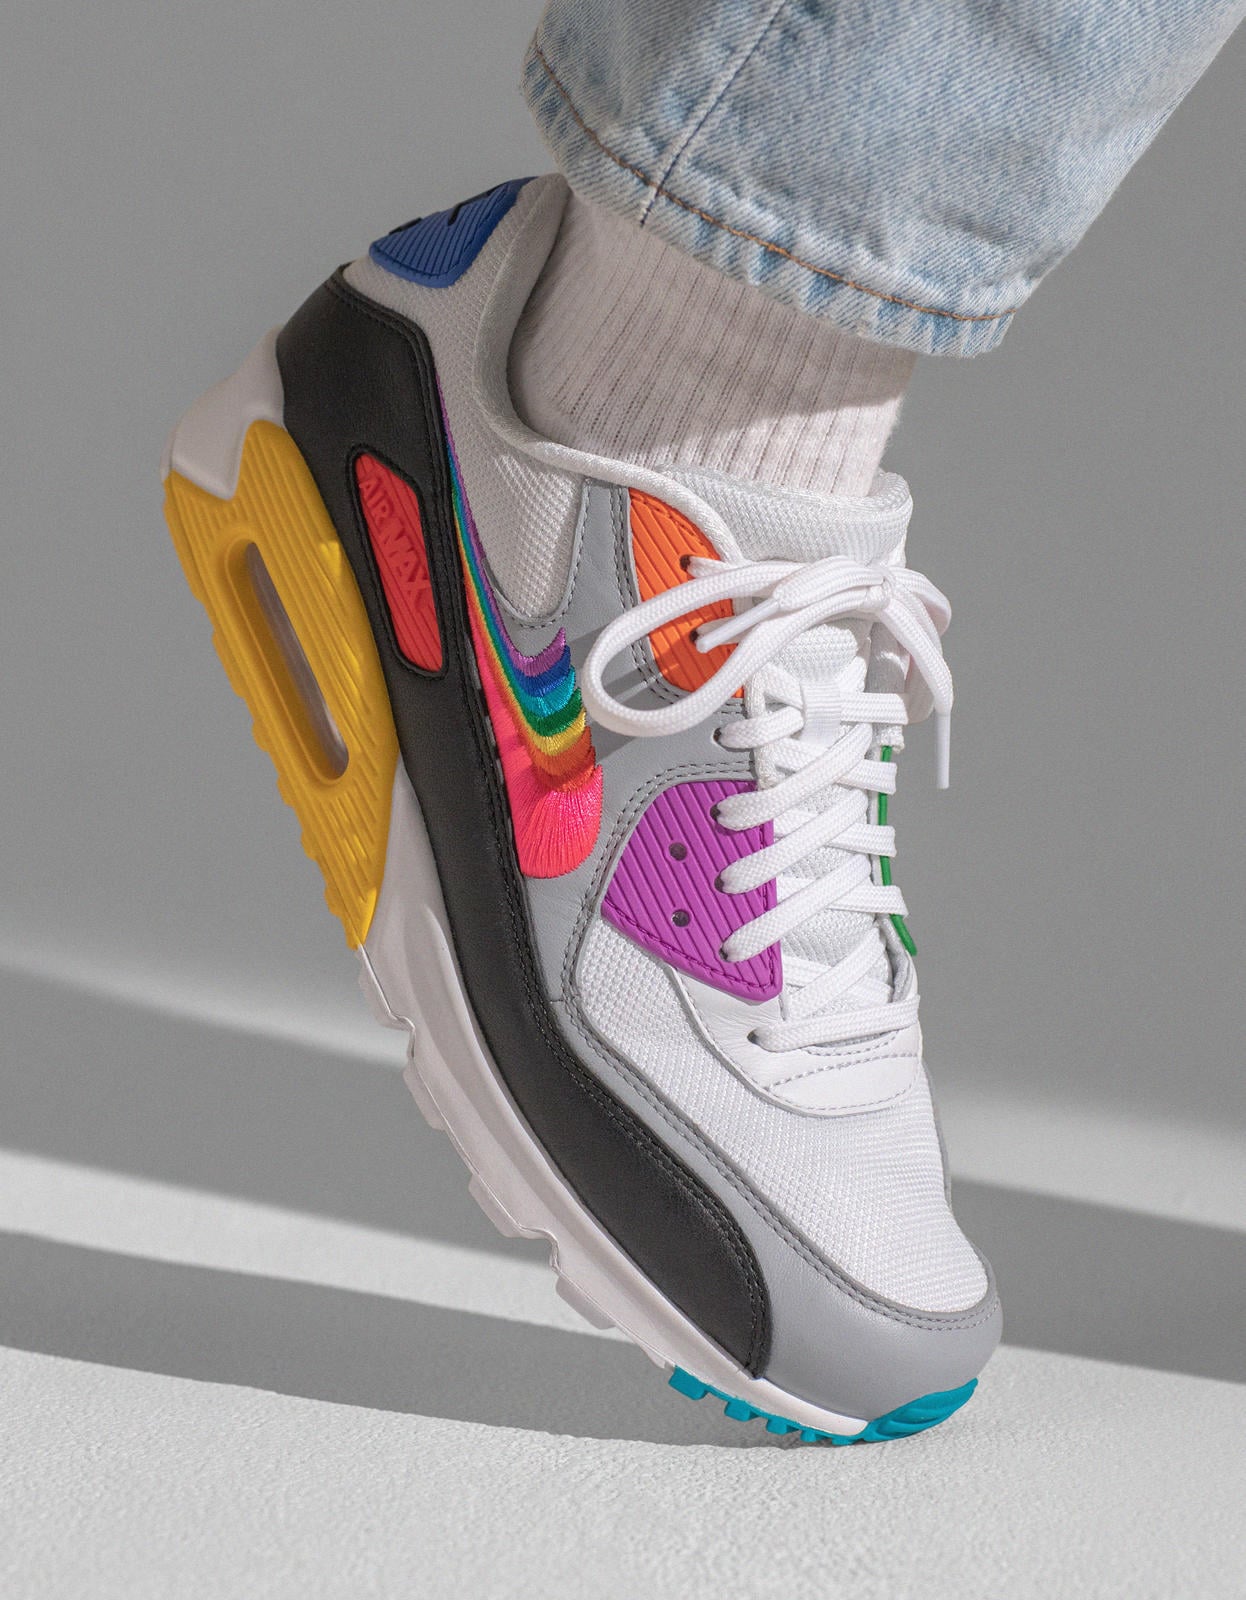 ga zo door Toelating achterstalligheid Nike Air Max 90 BeTrue | 52 Stylish Pride Pieces to Pick Up in June and  Wear Forever | POPSUGAR Fashion Photo 17